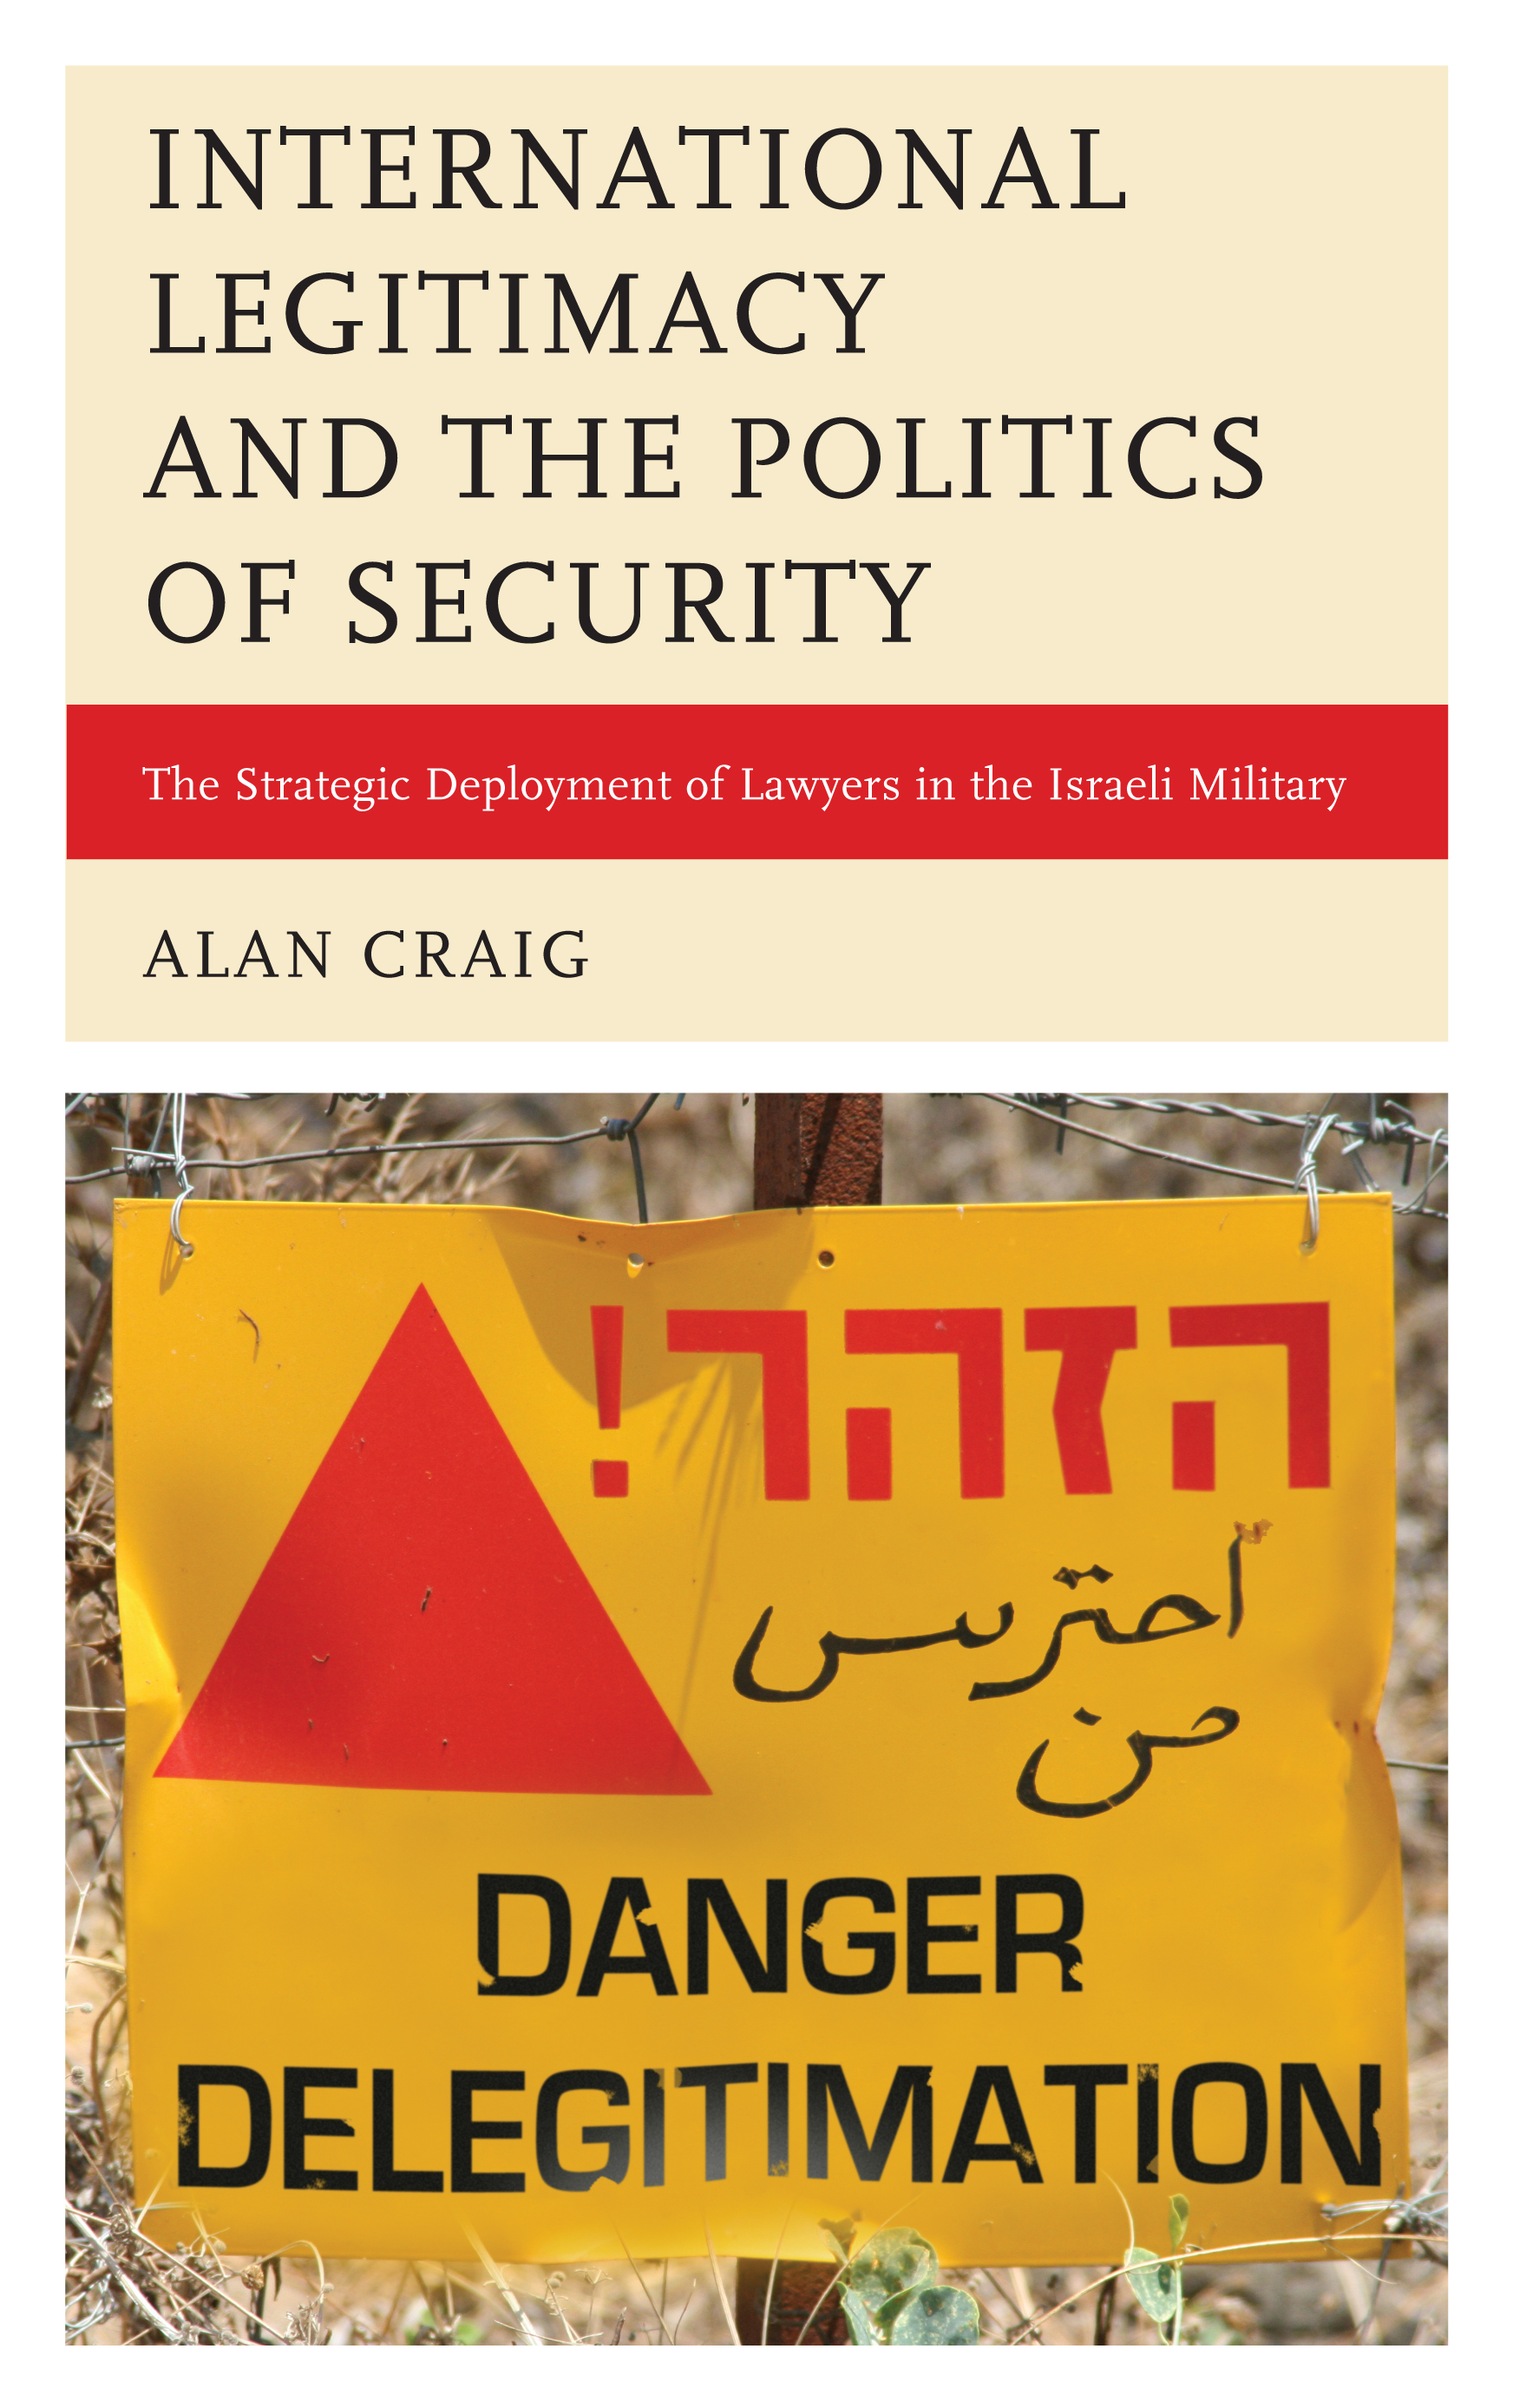 International Legitimacy and the Politics of Security: The Strategic Deployment of Lawyers in the Israeli Military